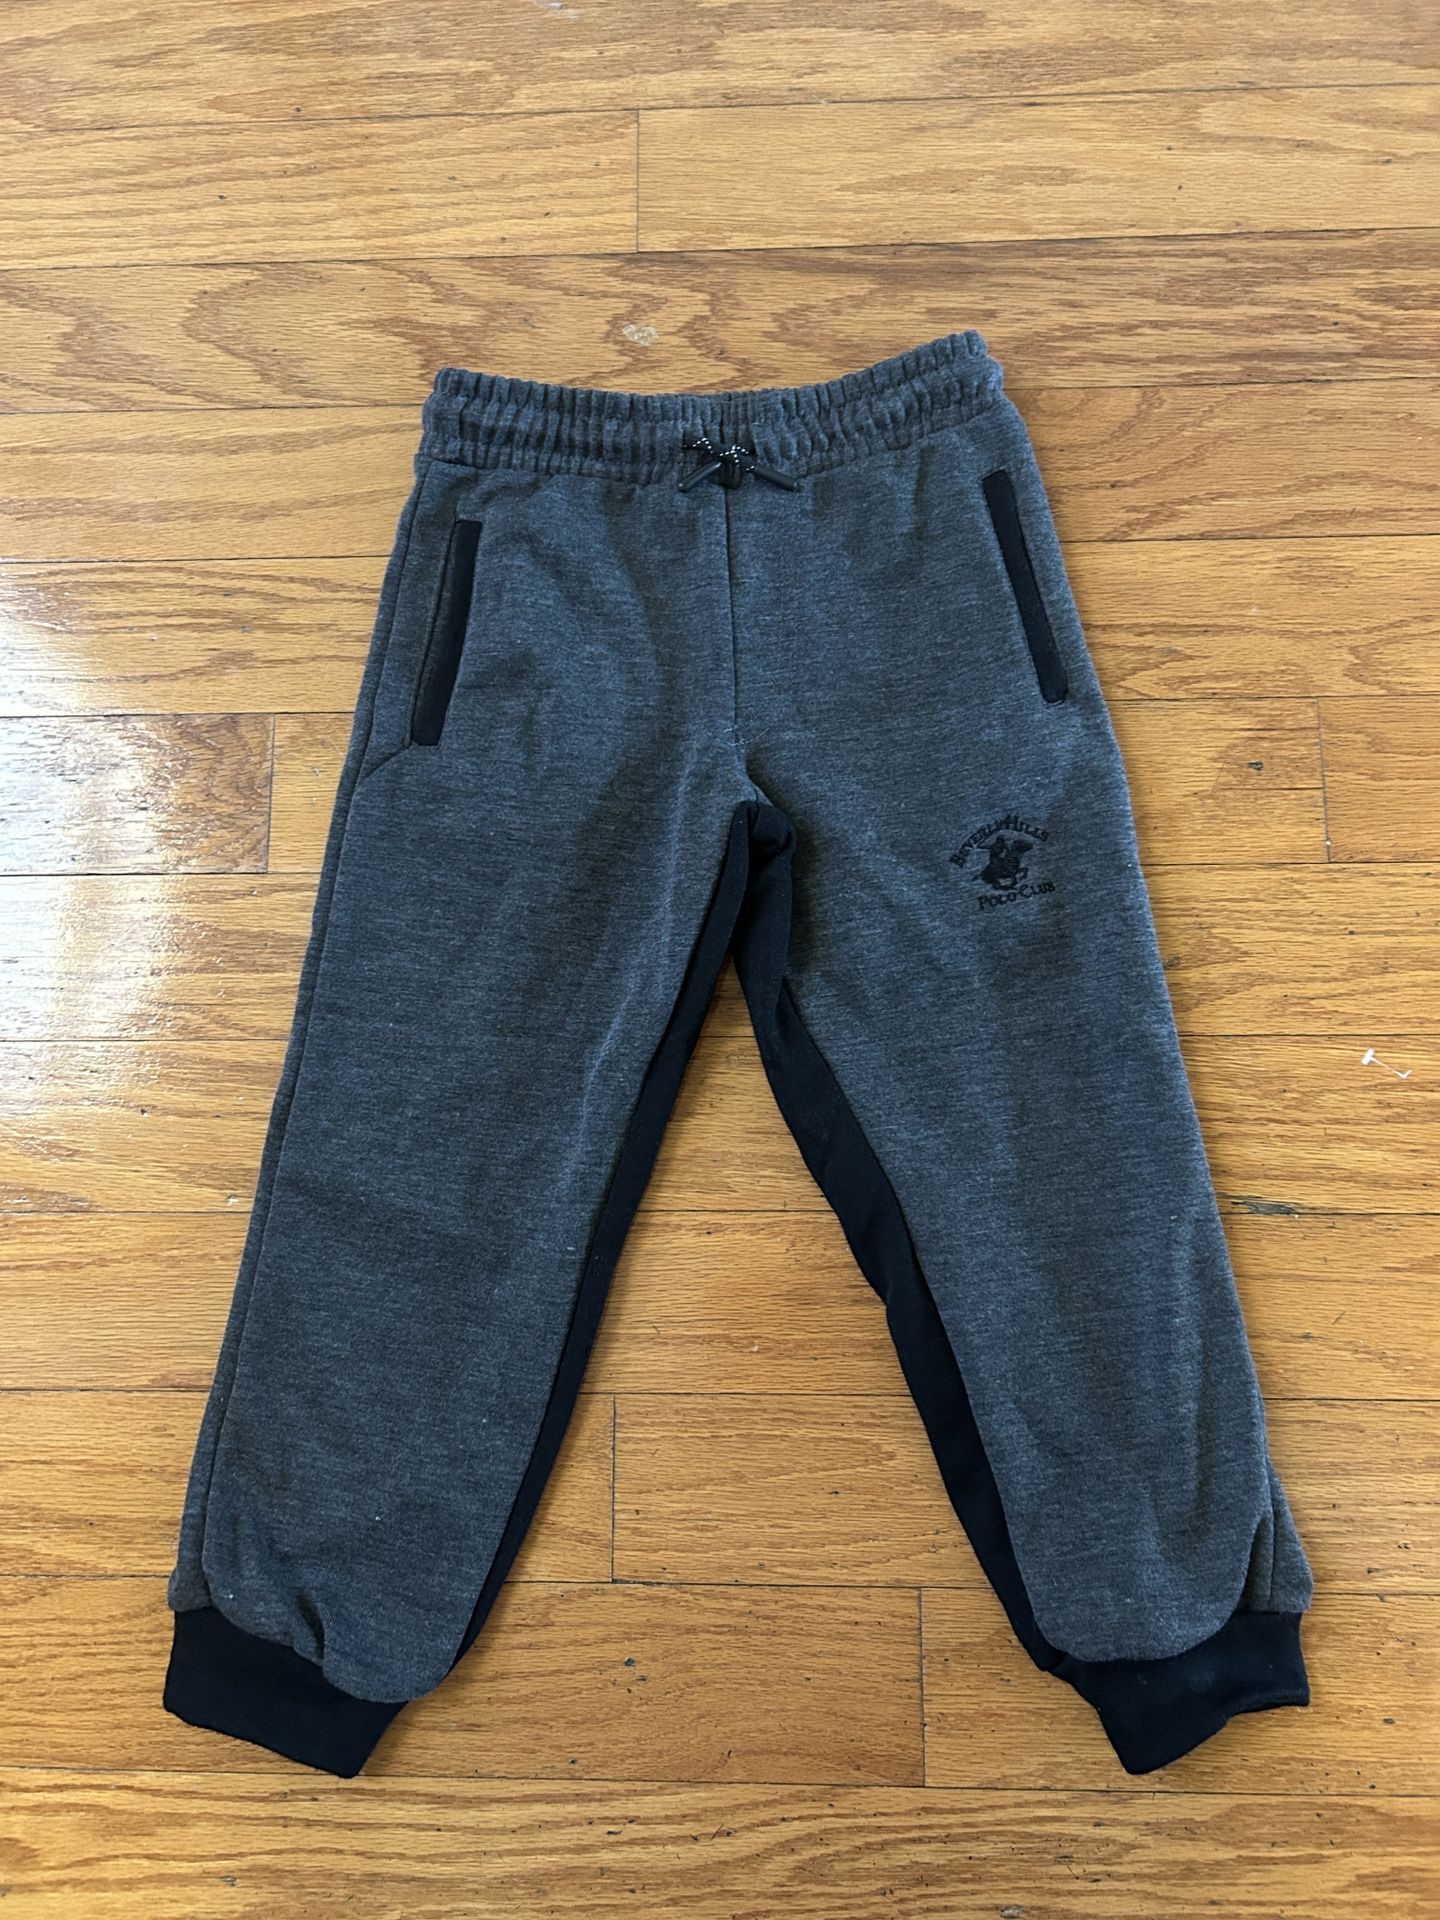 NEW Beverly Hills polo club boys joggers size 6